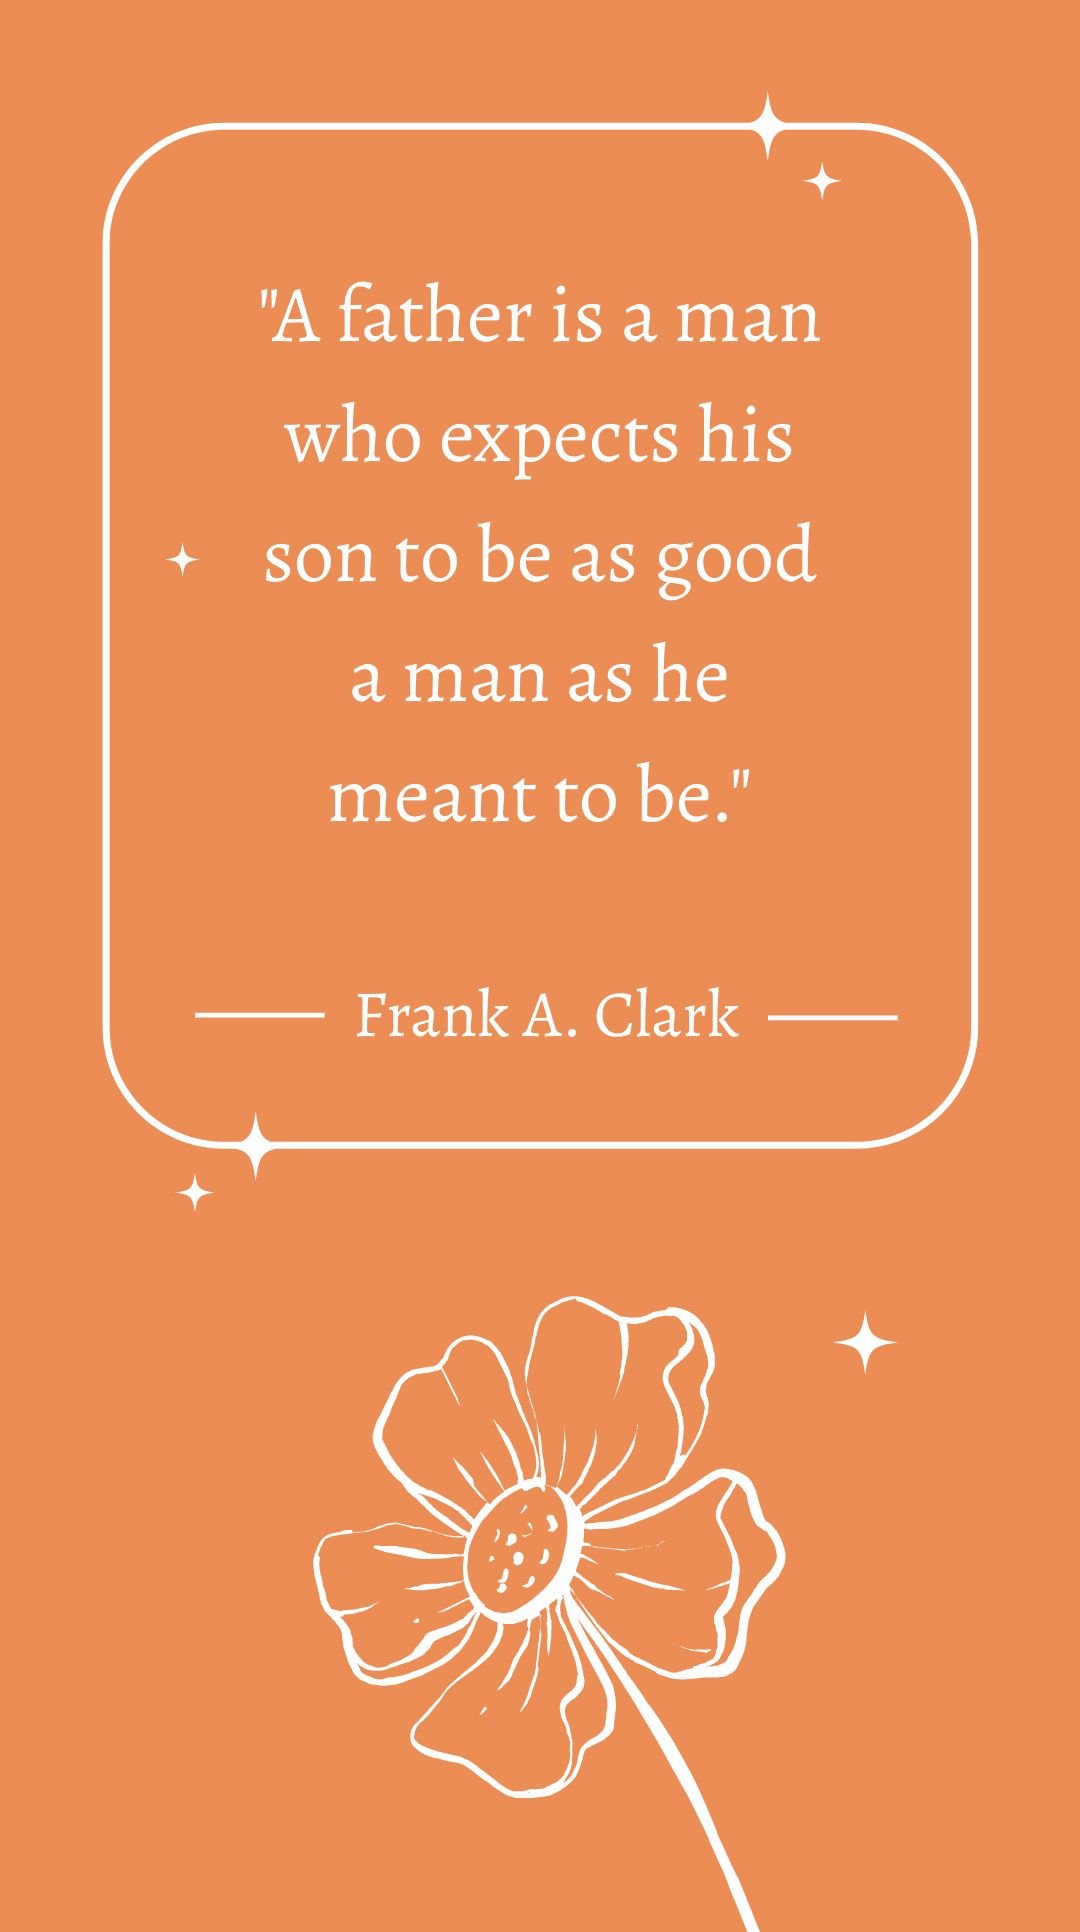 Frank A. Clark - A father is a man who expects his son to be as good a man as he meant to be.